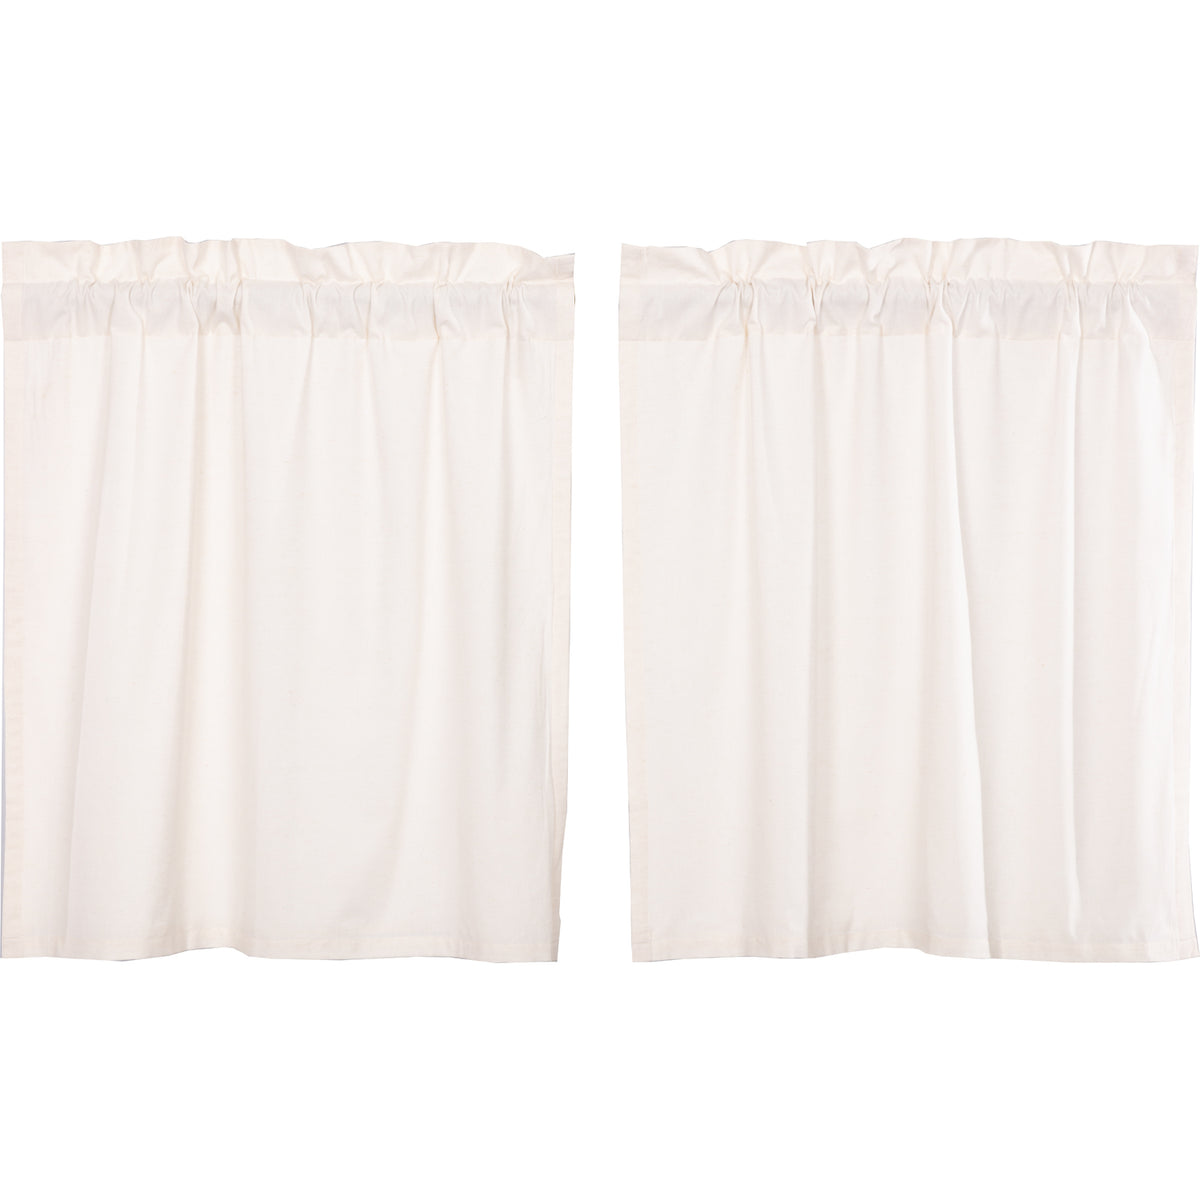 April & Olive Simple Life Flax Antique White Tier Set of 2 L36xW36 By VHC Brands